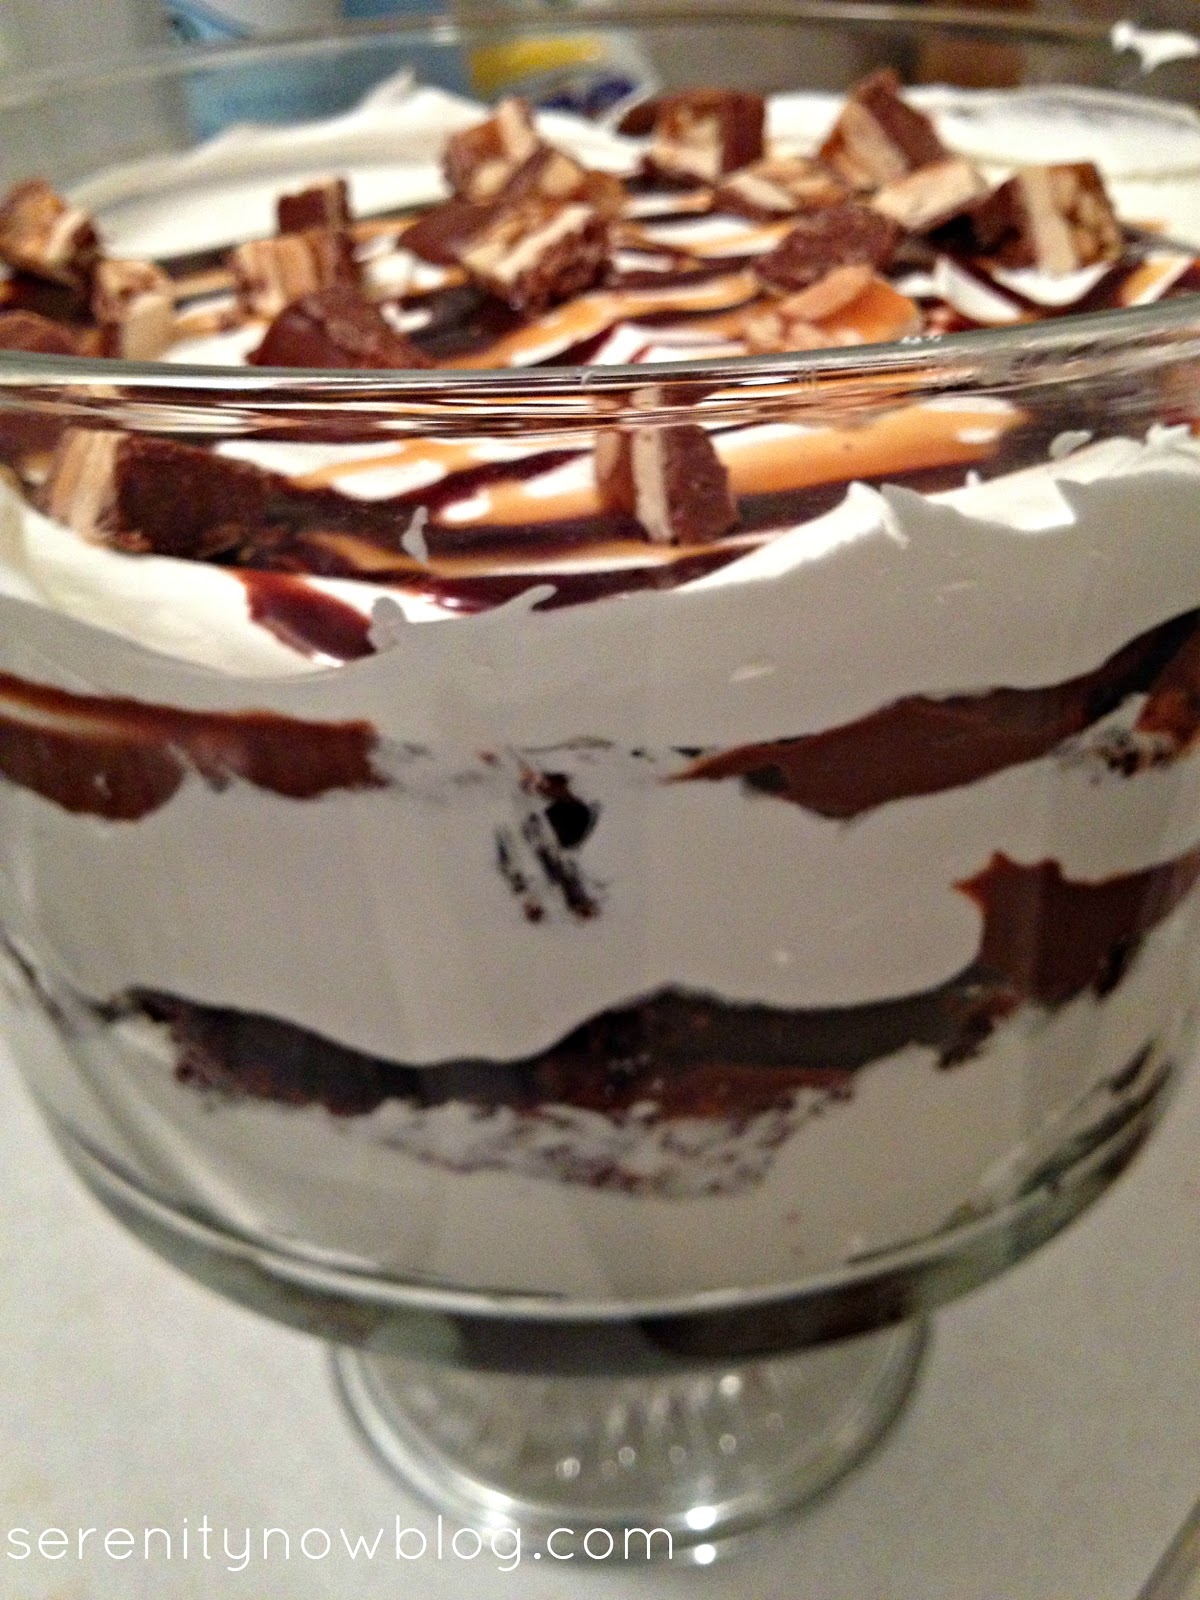 Serenity Now: Chocolate Brownie Trifle (Easy Holiday Dessert)